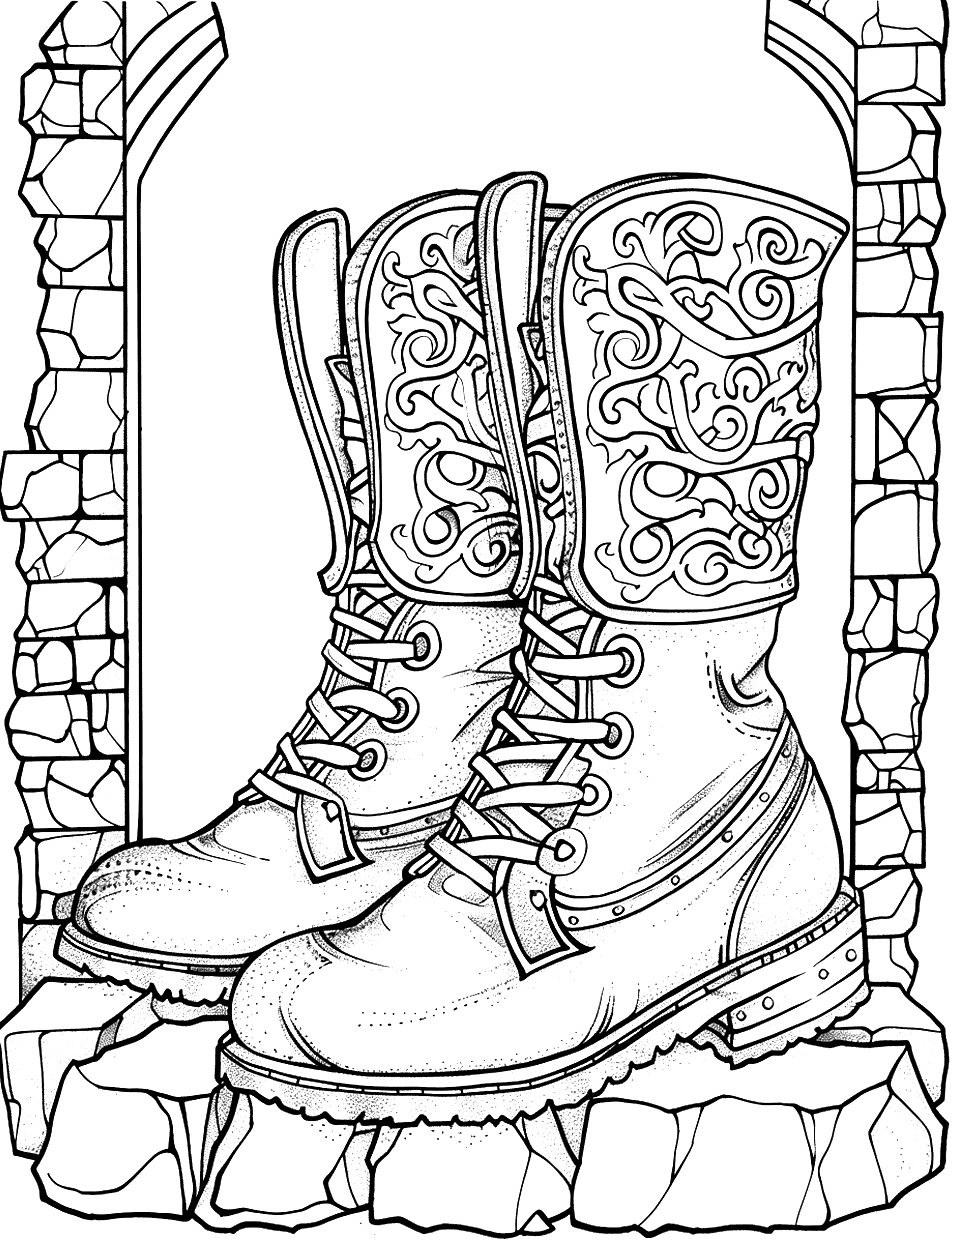 Legendary Knight's Boots Shoe Coloring Page - Heavy Legendary knight’s boots showcased against stone castle walls.